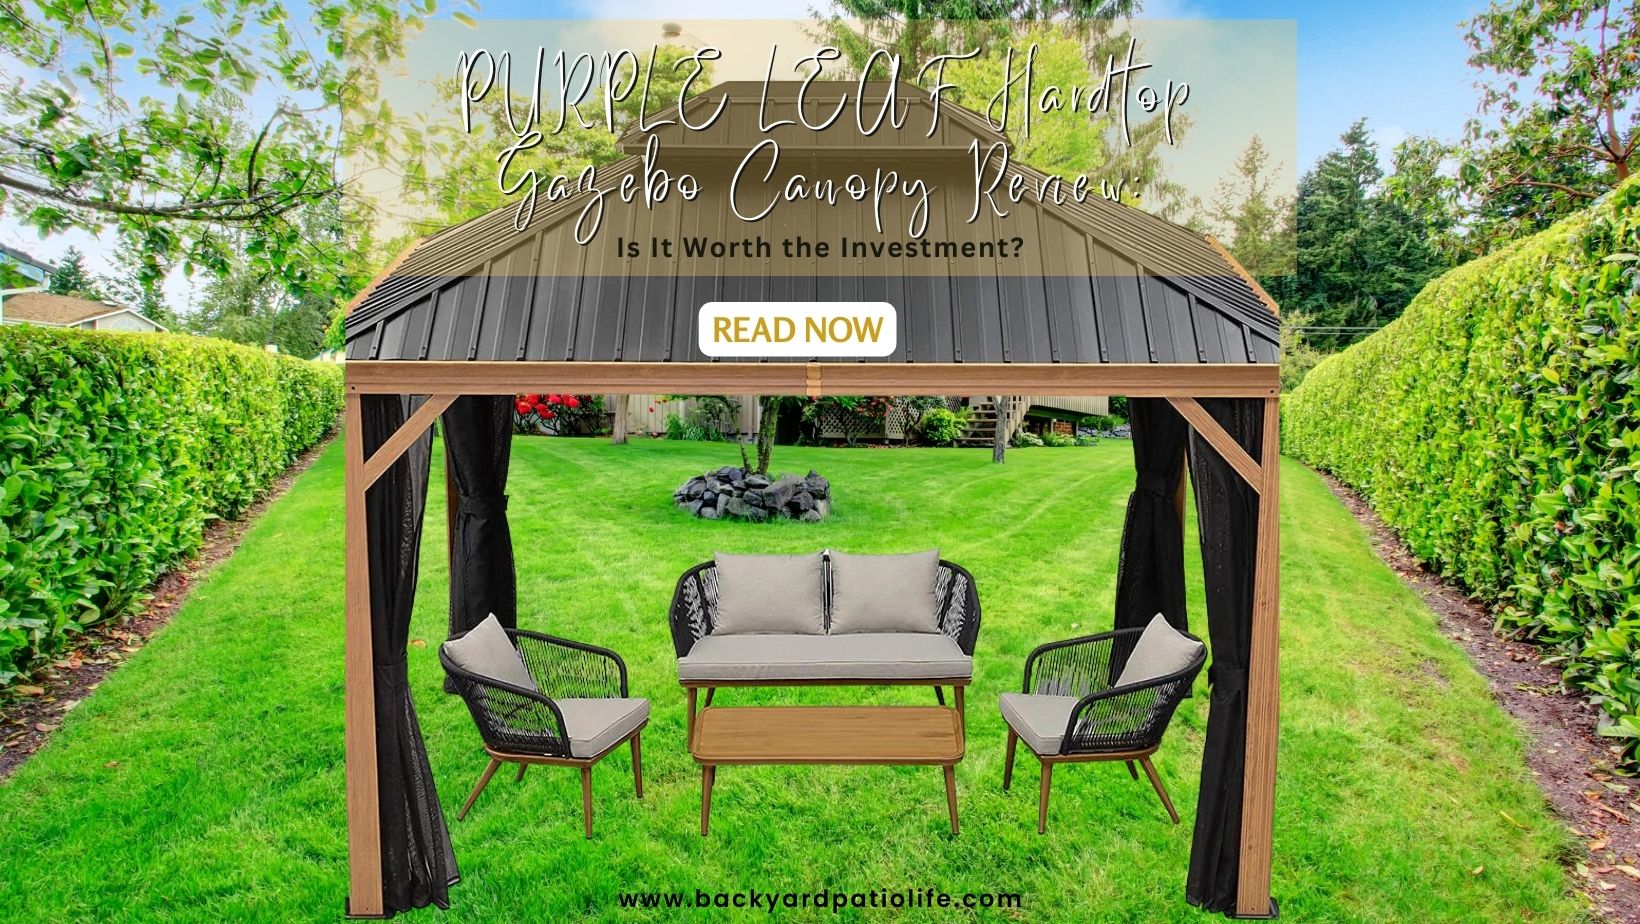 PURPLE LEAF Hardtop Gazebo Canopy Review: Is It Worth the Investment?